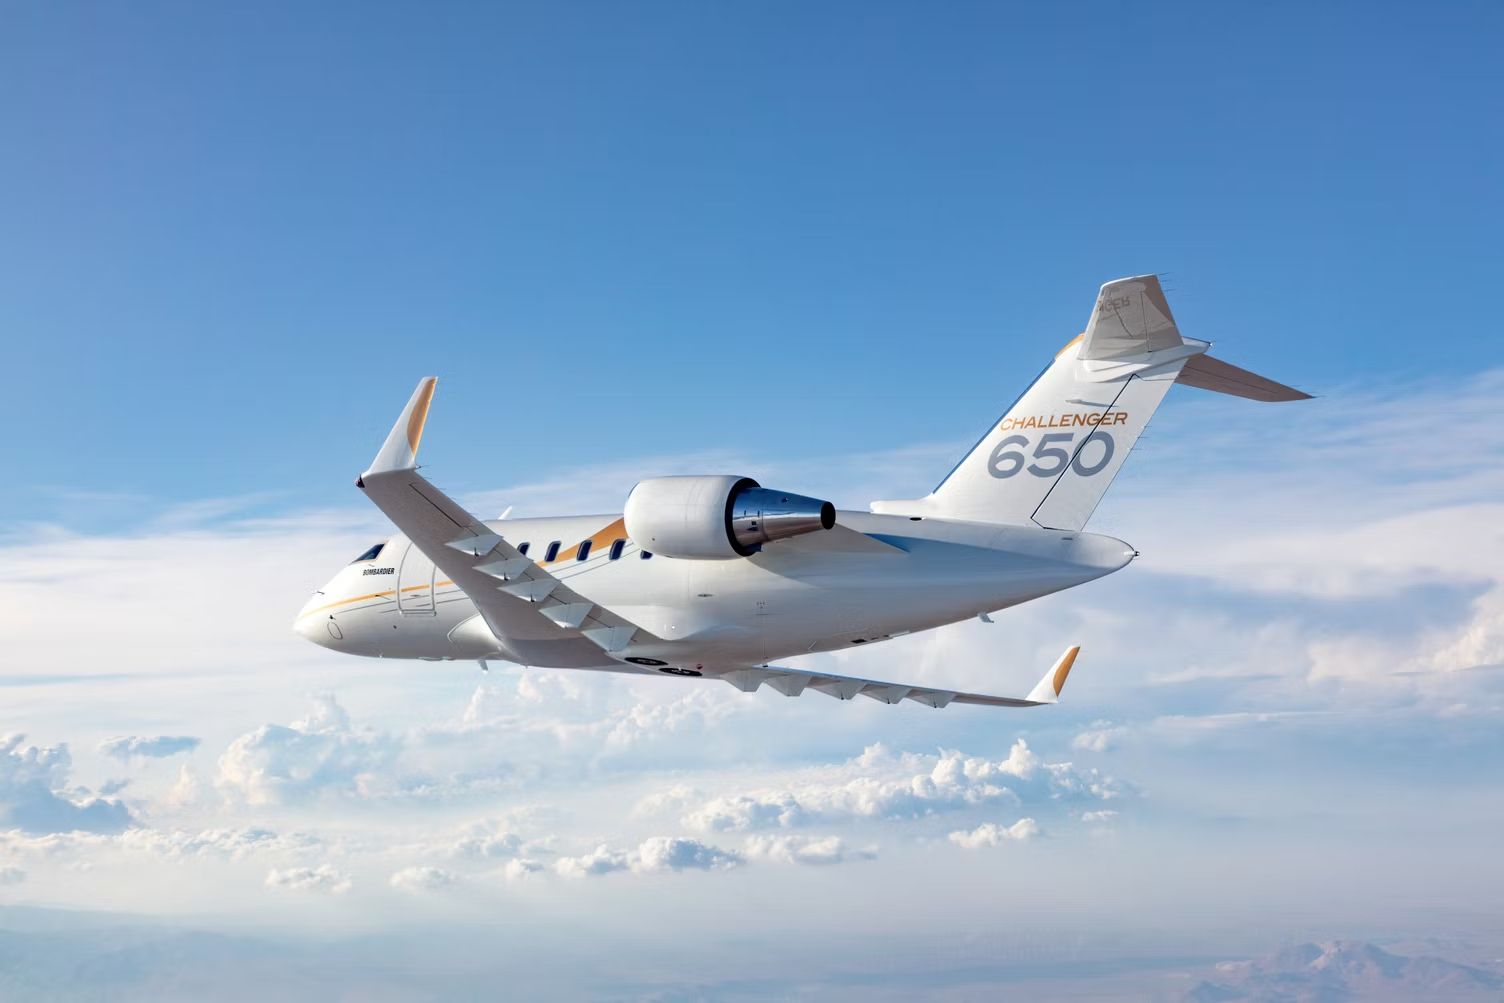 A Bombardier Challenger 650 flying in the sky.